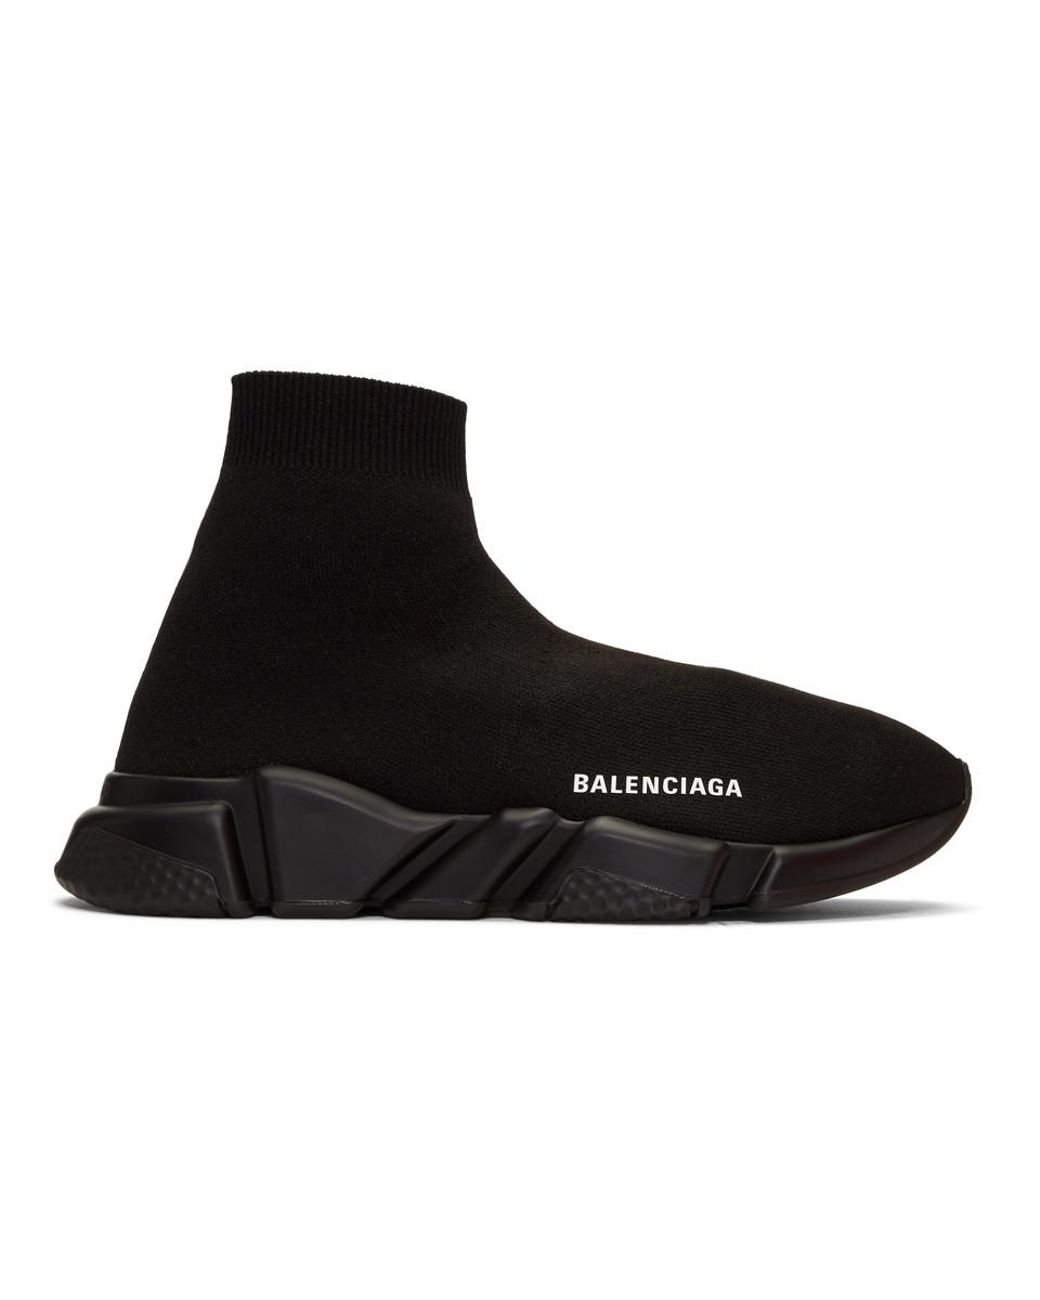 Lyst - Balenciaga Speed Sneakers in Black for Men - Save 8%